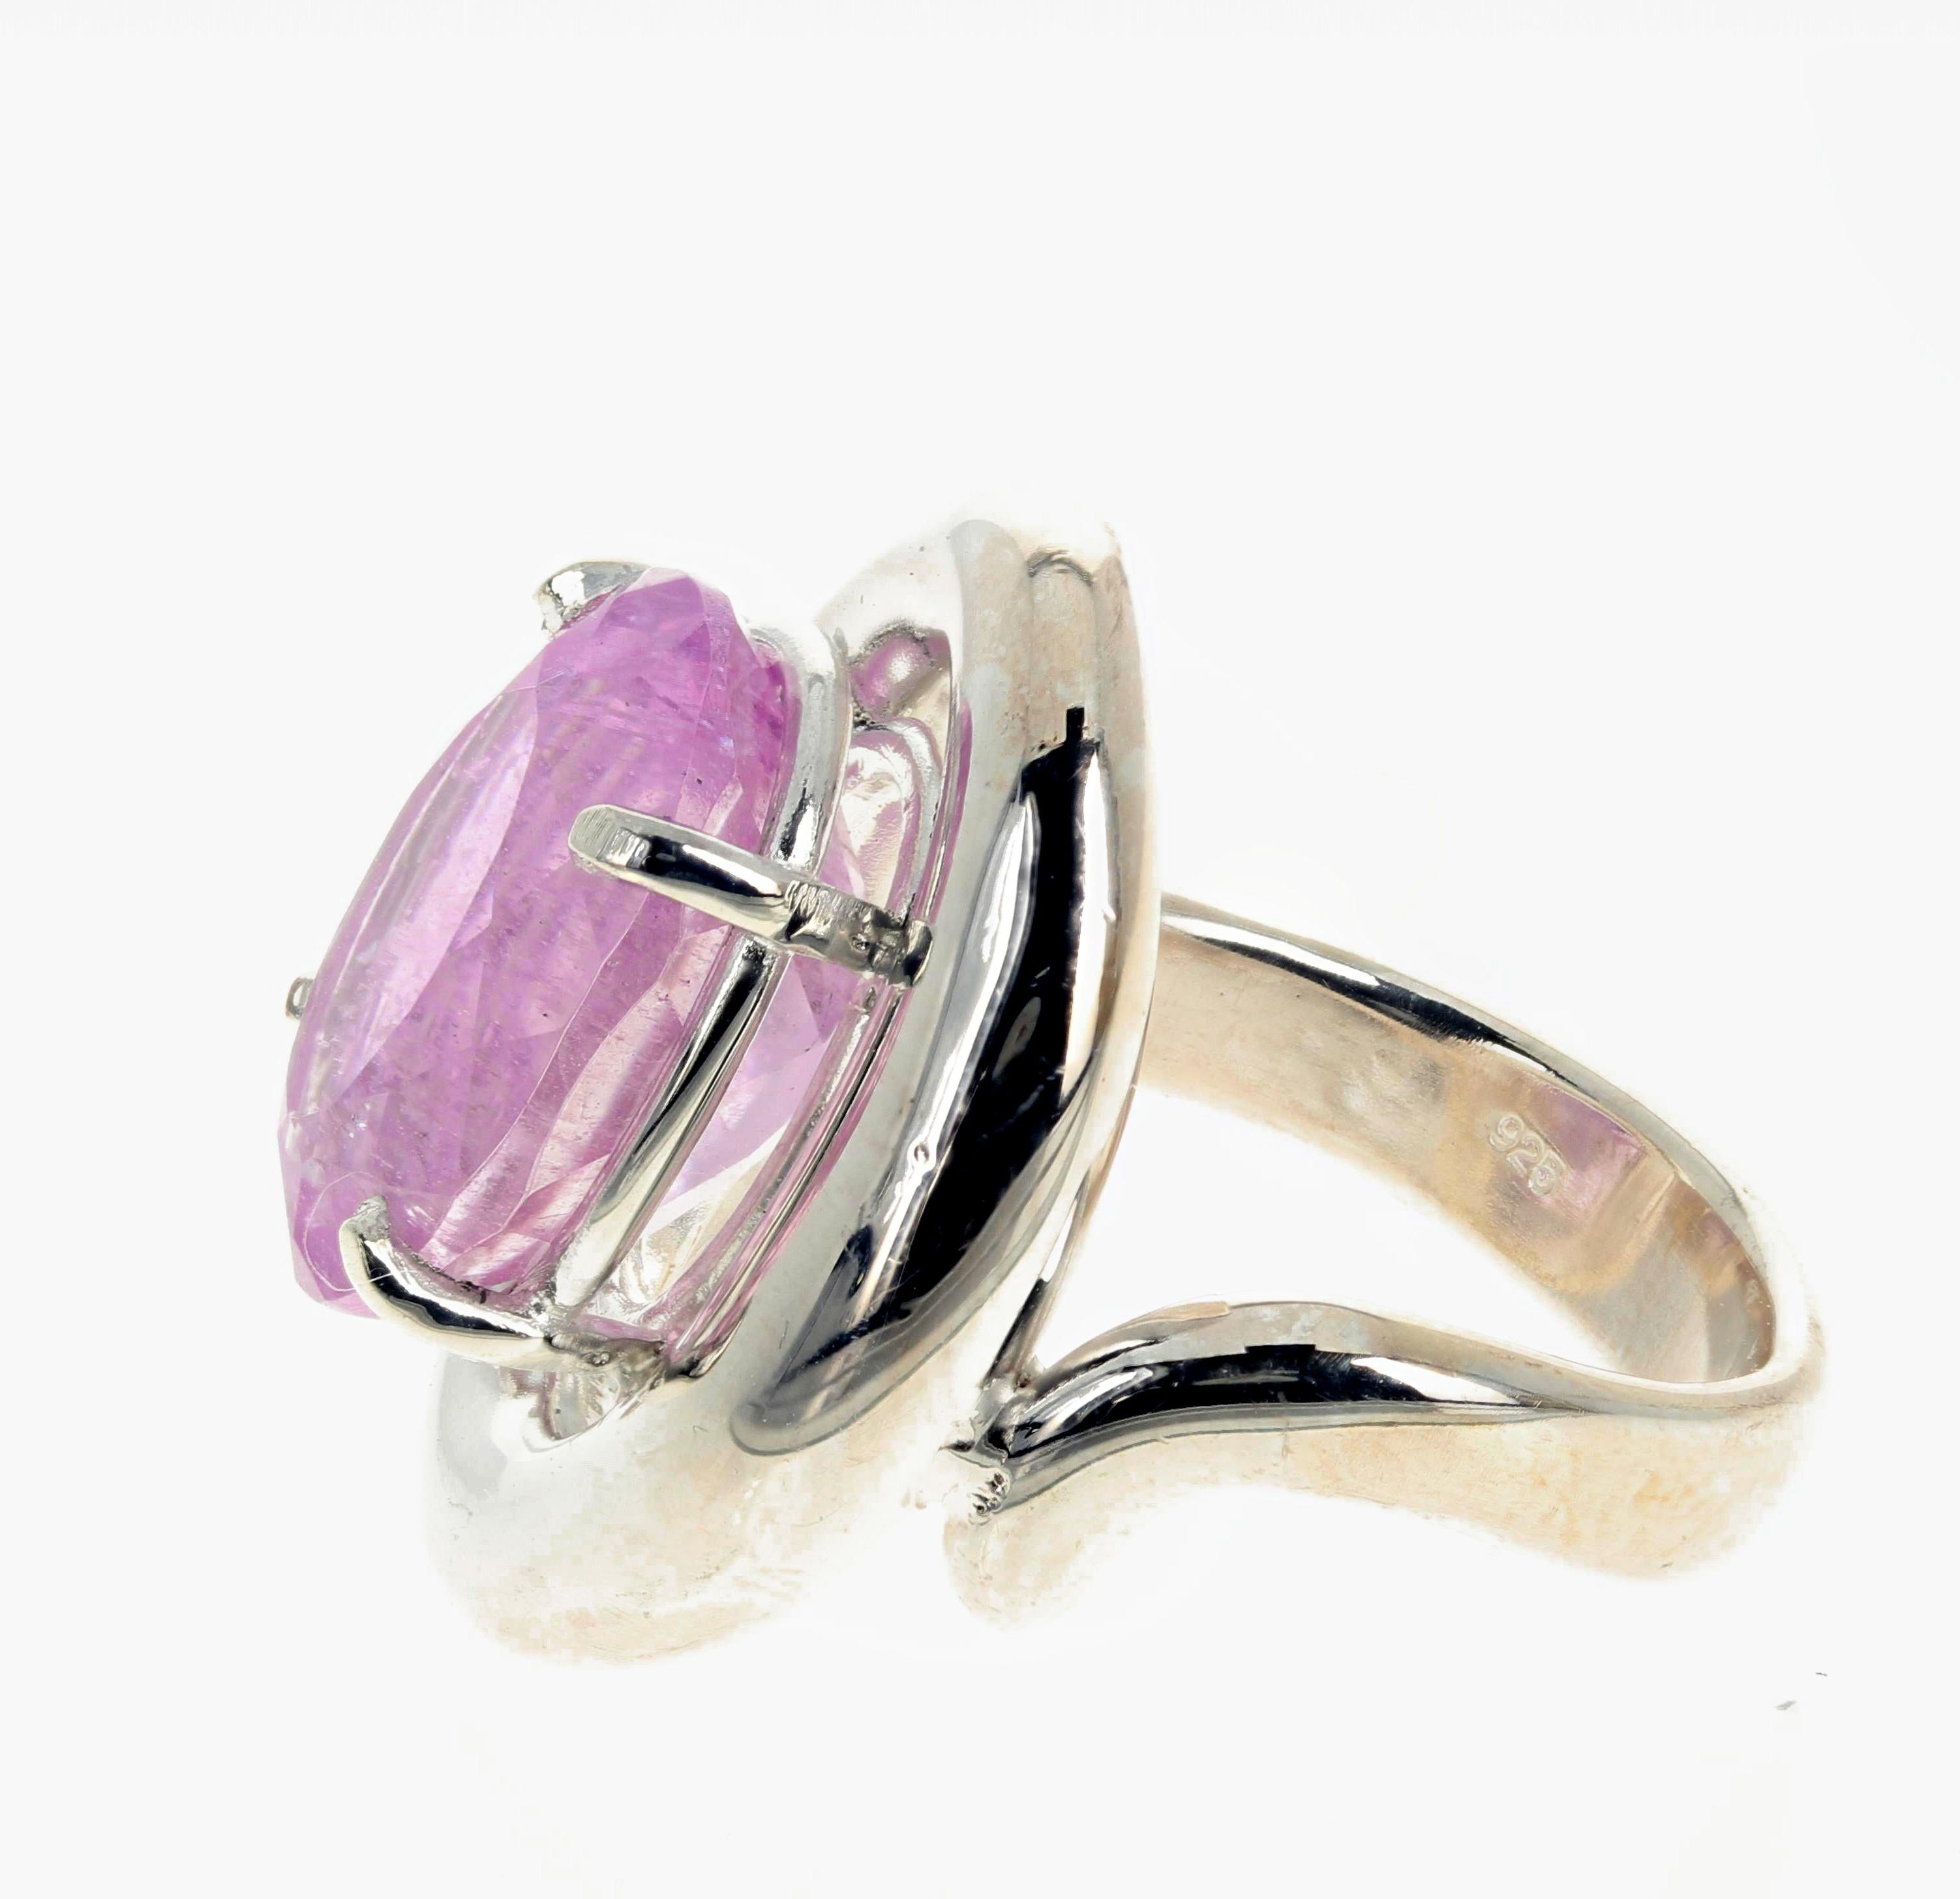 Oval Cut AJD Intensely Pink Natural 9.76 Ct. Kunzite Dramatic Sterling Silver Ring For Sale